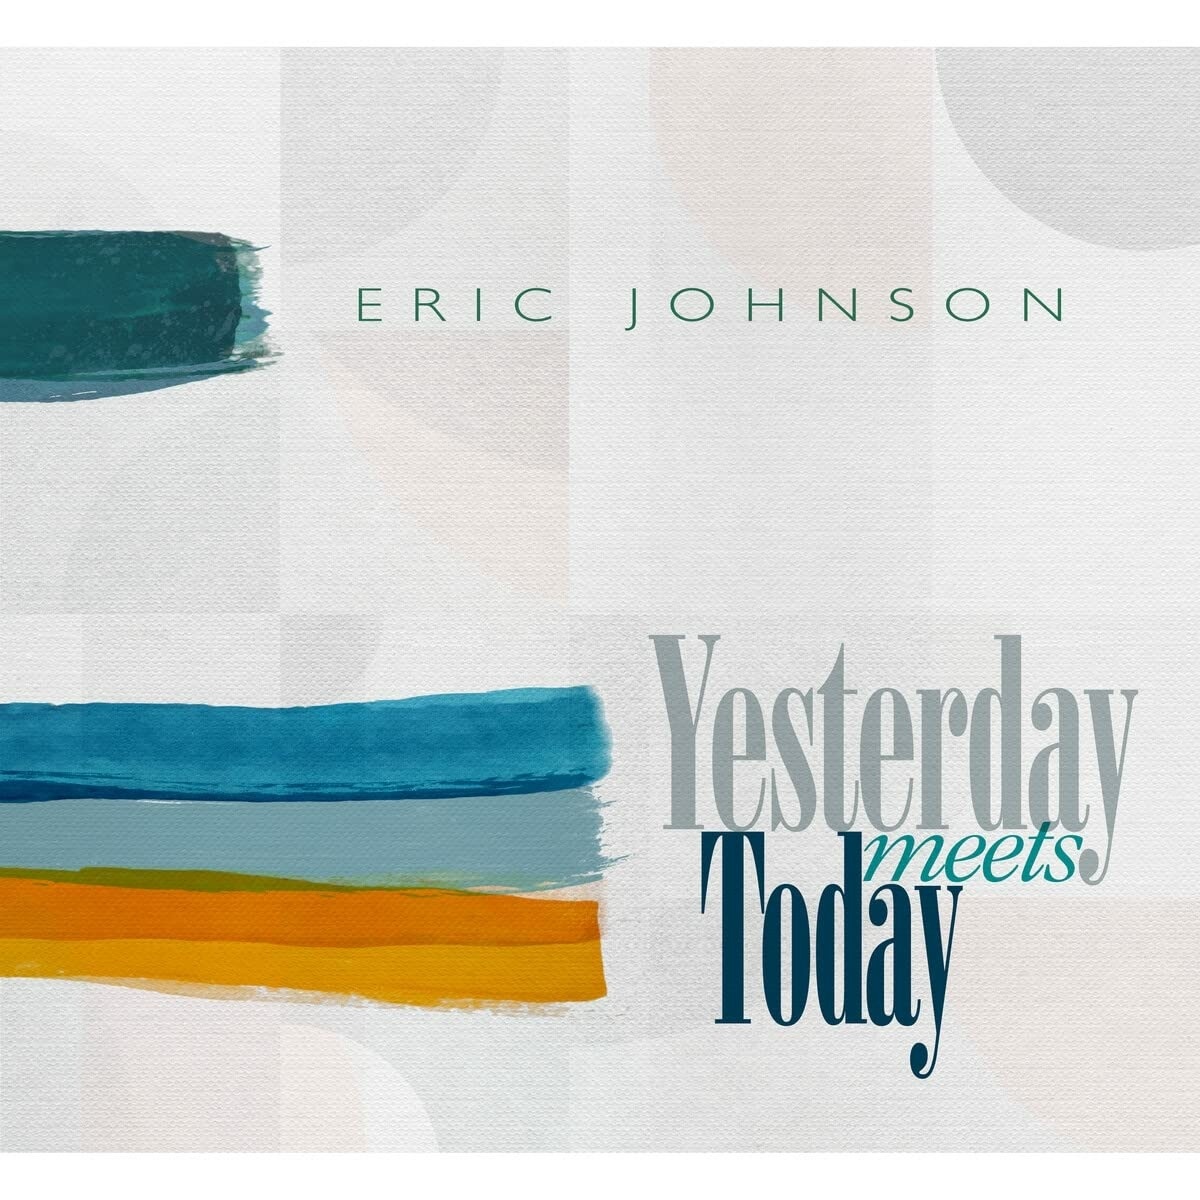 Are we meeting today. Eric Johnson Tones LP.